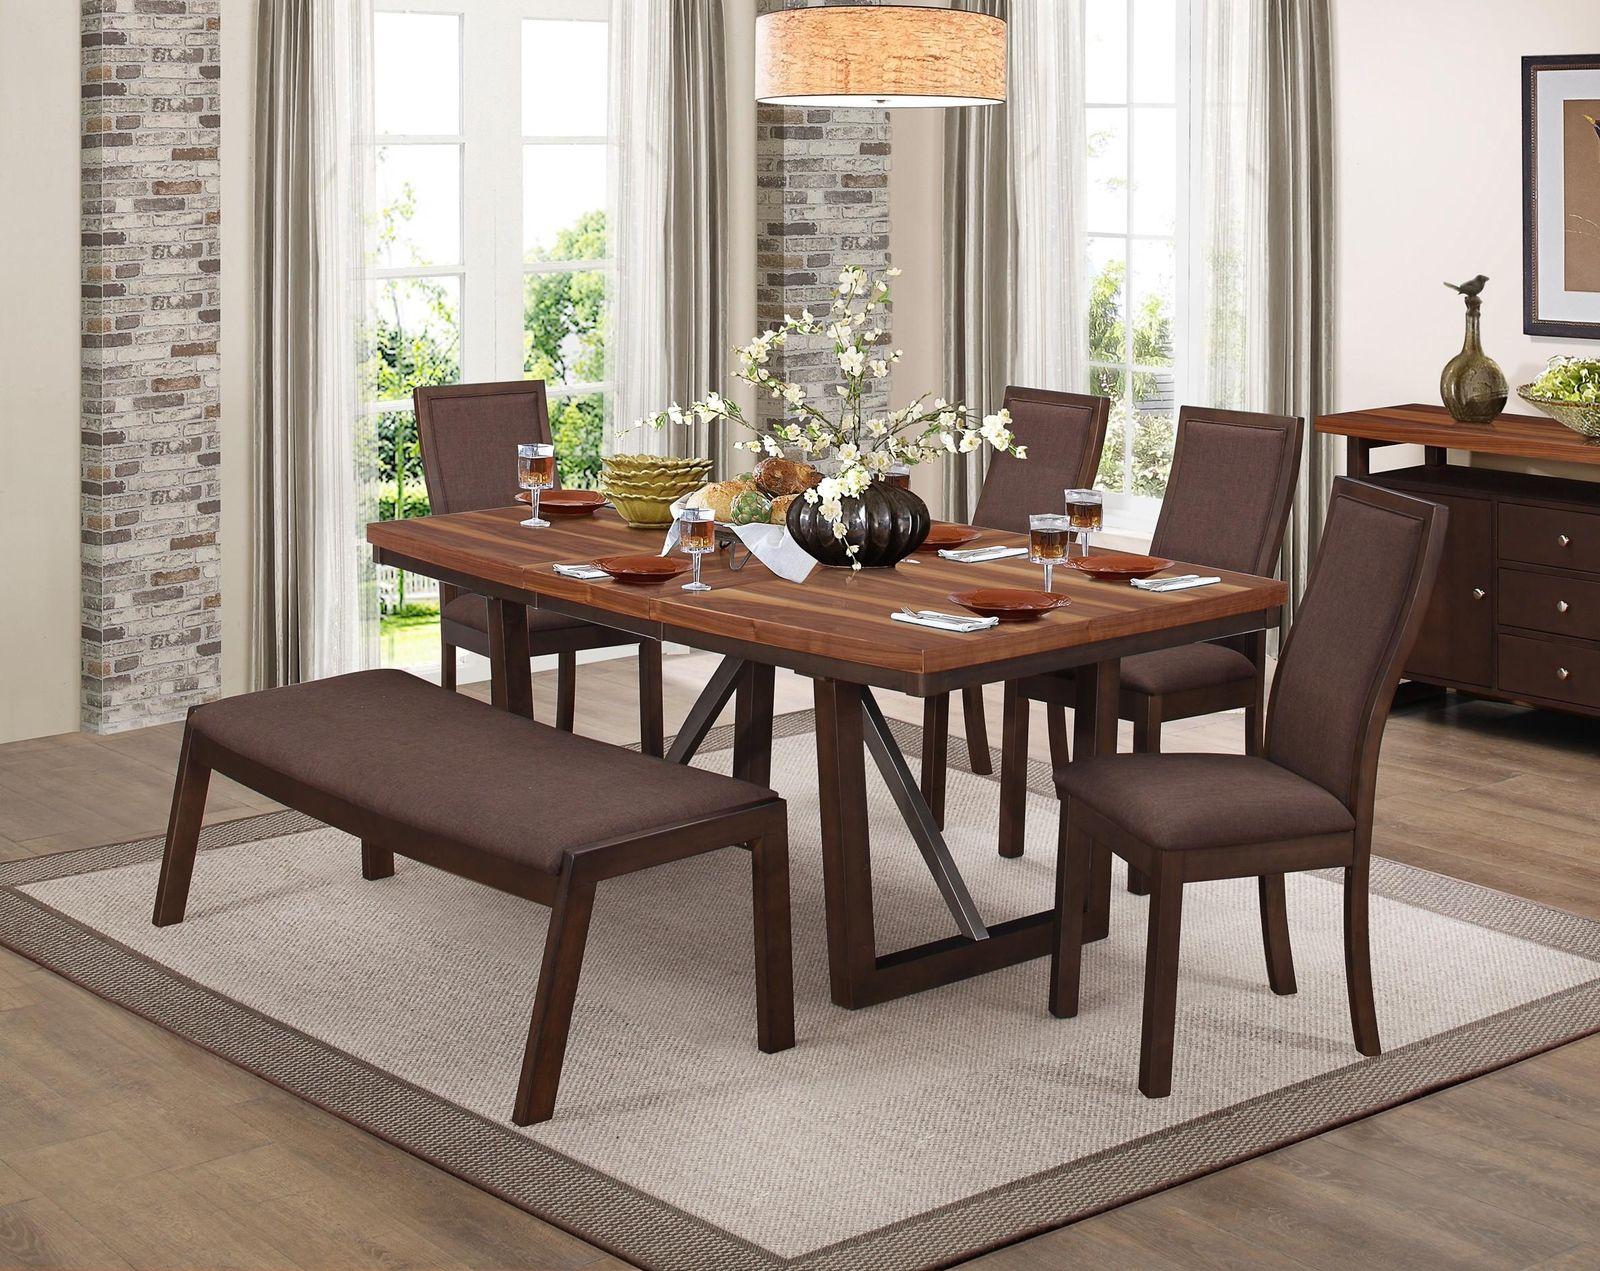 Contemporary, Modern Dining Table Set Beaugrand 5431-77+5431Sx4+5431-14-Compson in Chocolate, Walnut Fabric